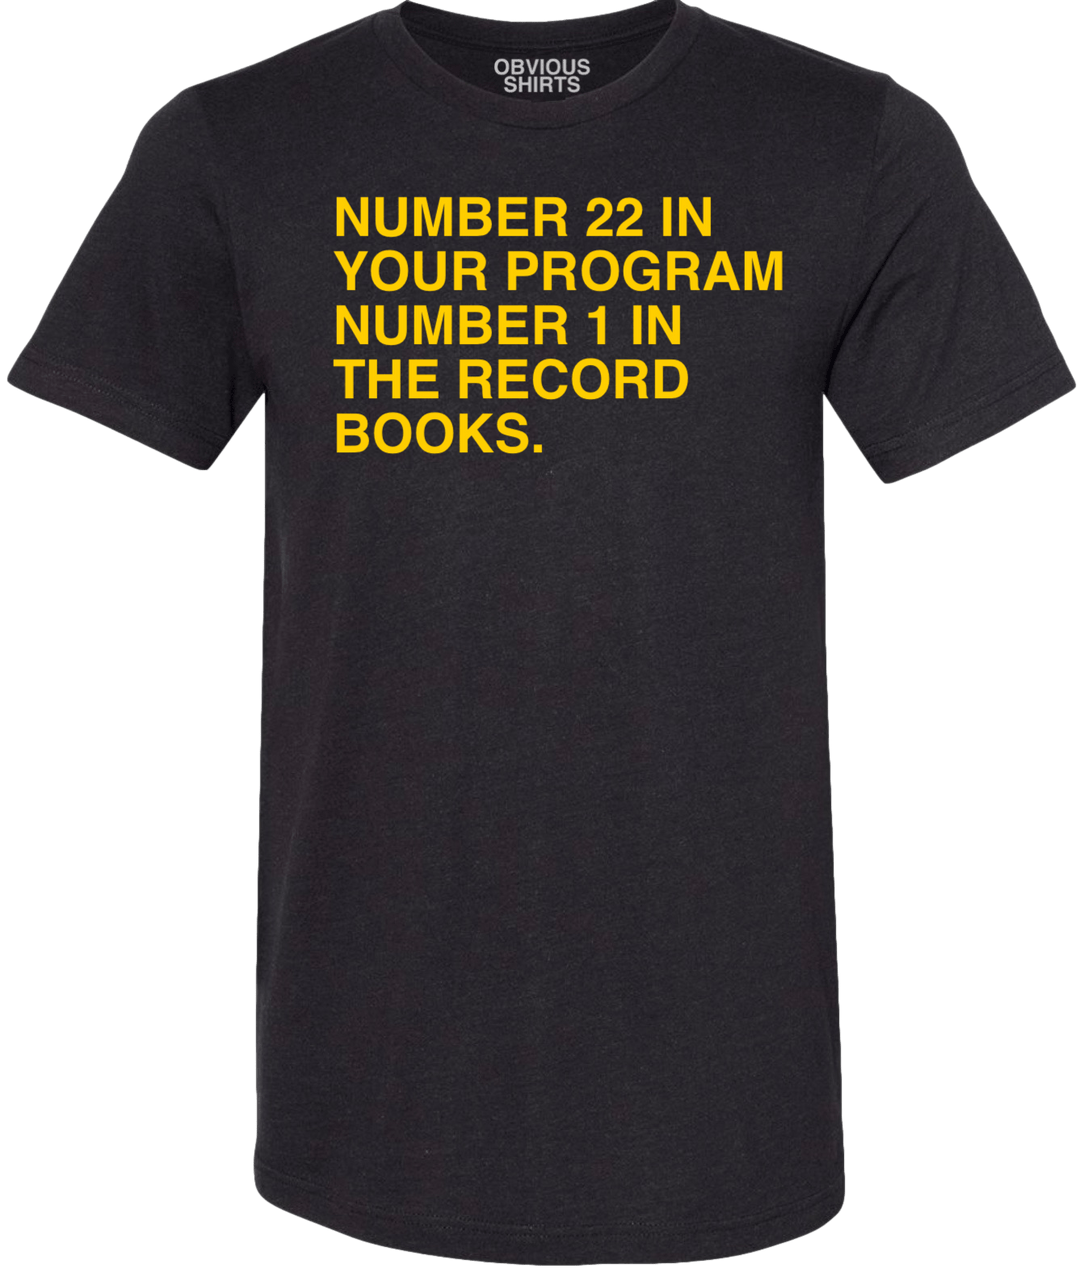 22 IN YOUR PROGRAM, 1 IN THE RECORD BOOKS. - OBVIOUS SHIRTS